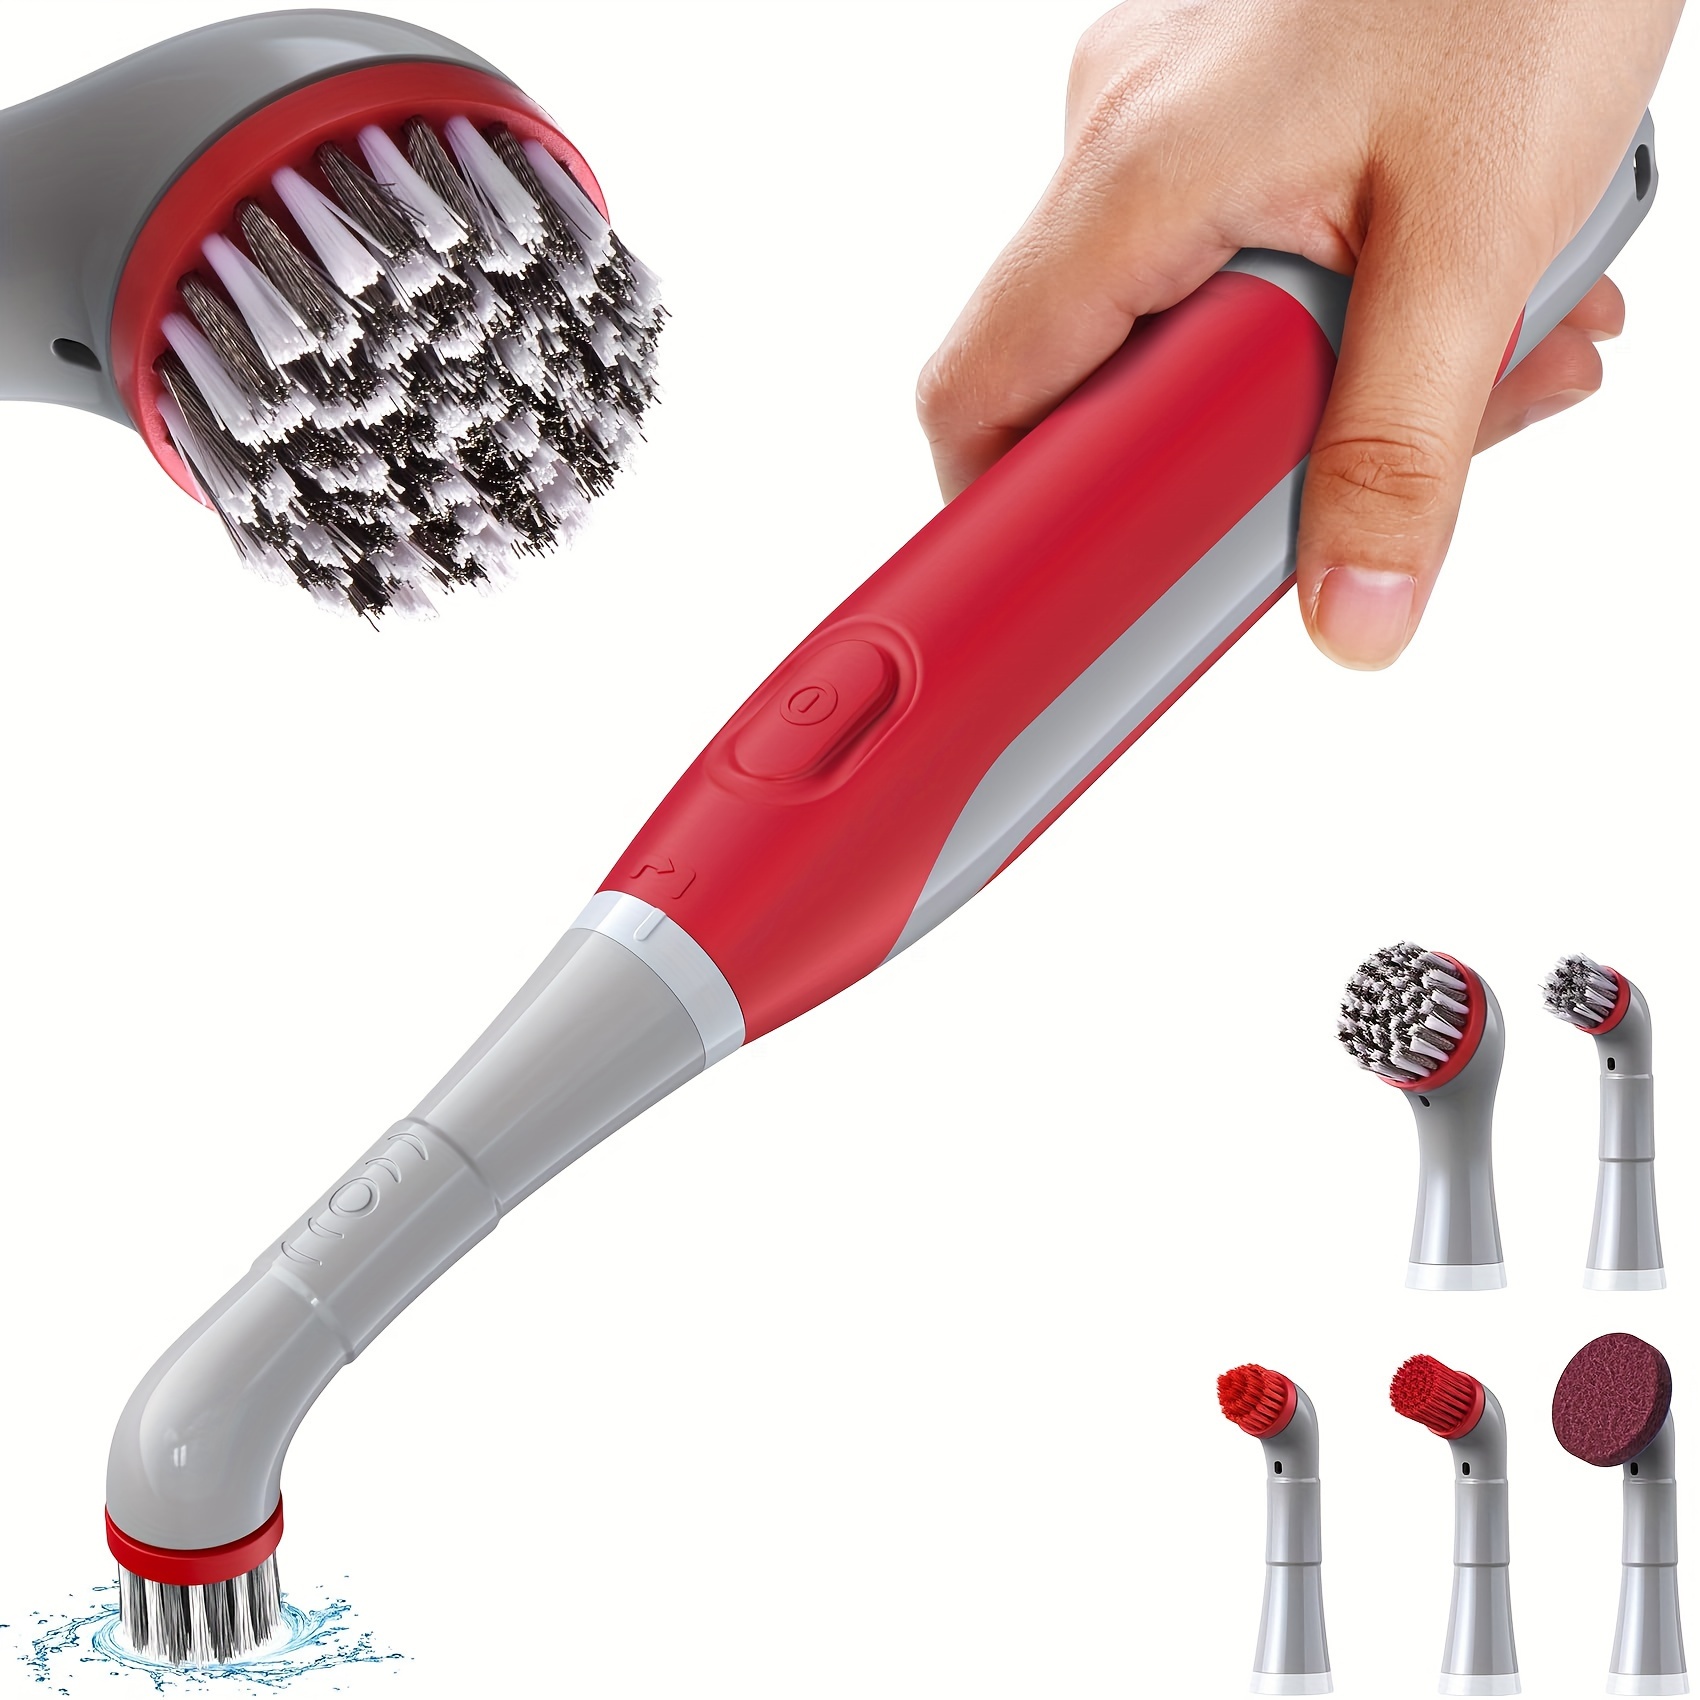 

Electric Grout Cleaning Brush, Battery Operated Power Scrubber With Upgraded Stainless Wire Brush, Multi-purpose Scrub Brush Cleaner For Grout, Tile, Corner, Kitchen, Bathroom, Shower